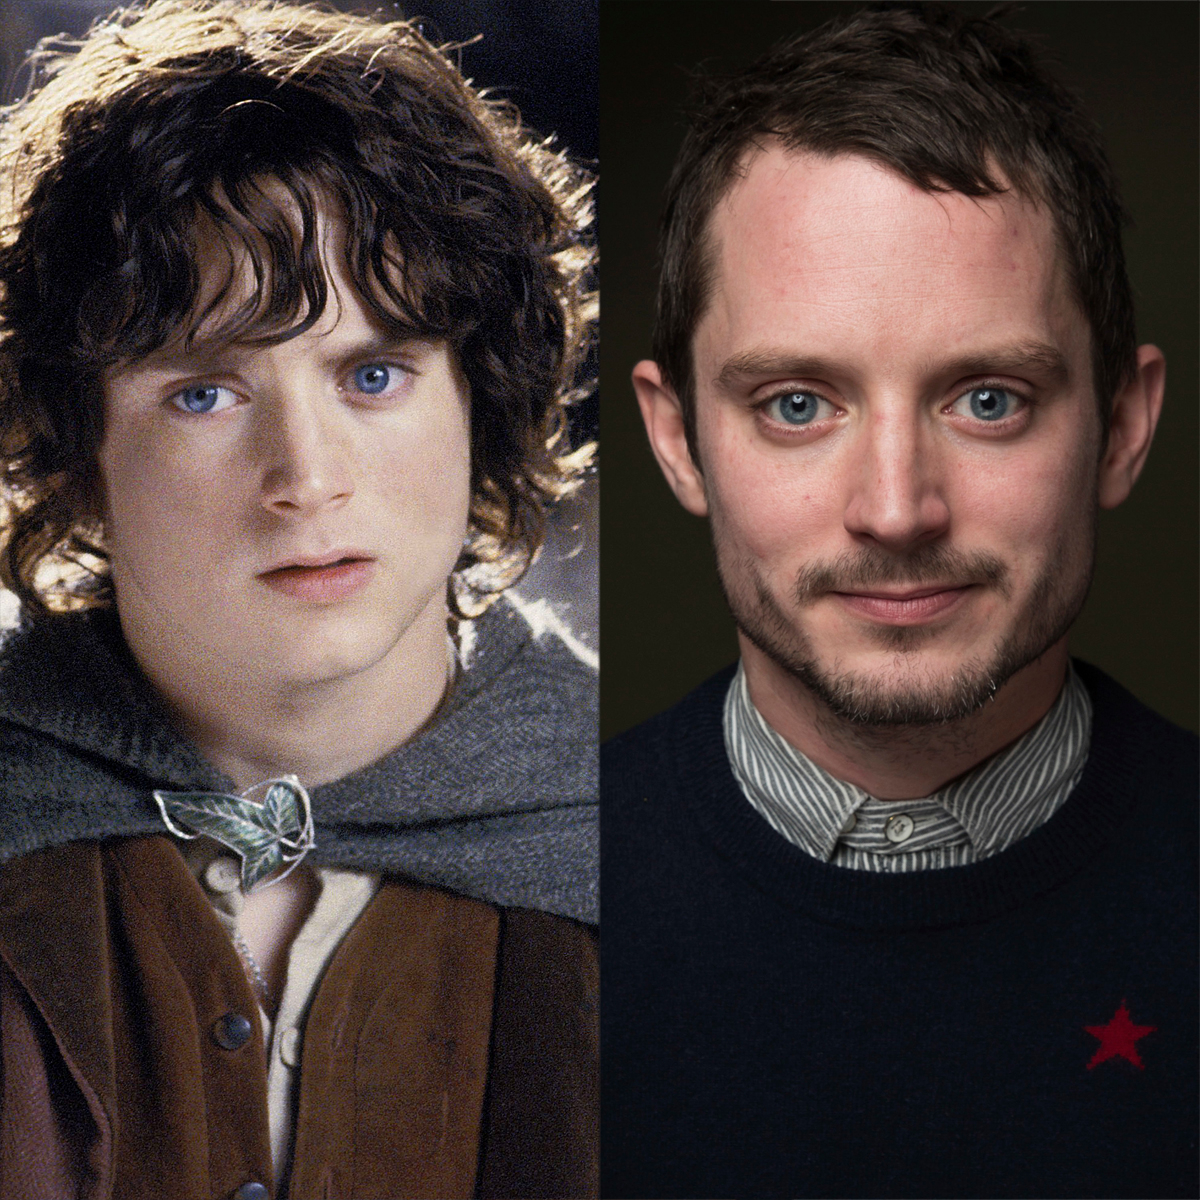 The Lord of the Rings (film series) All Cast: Then and Now ☆ 2020 